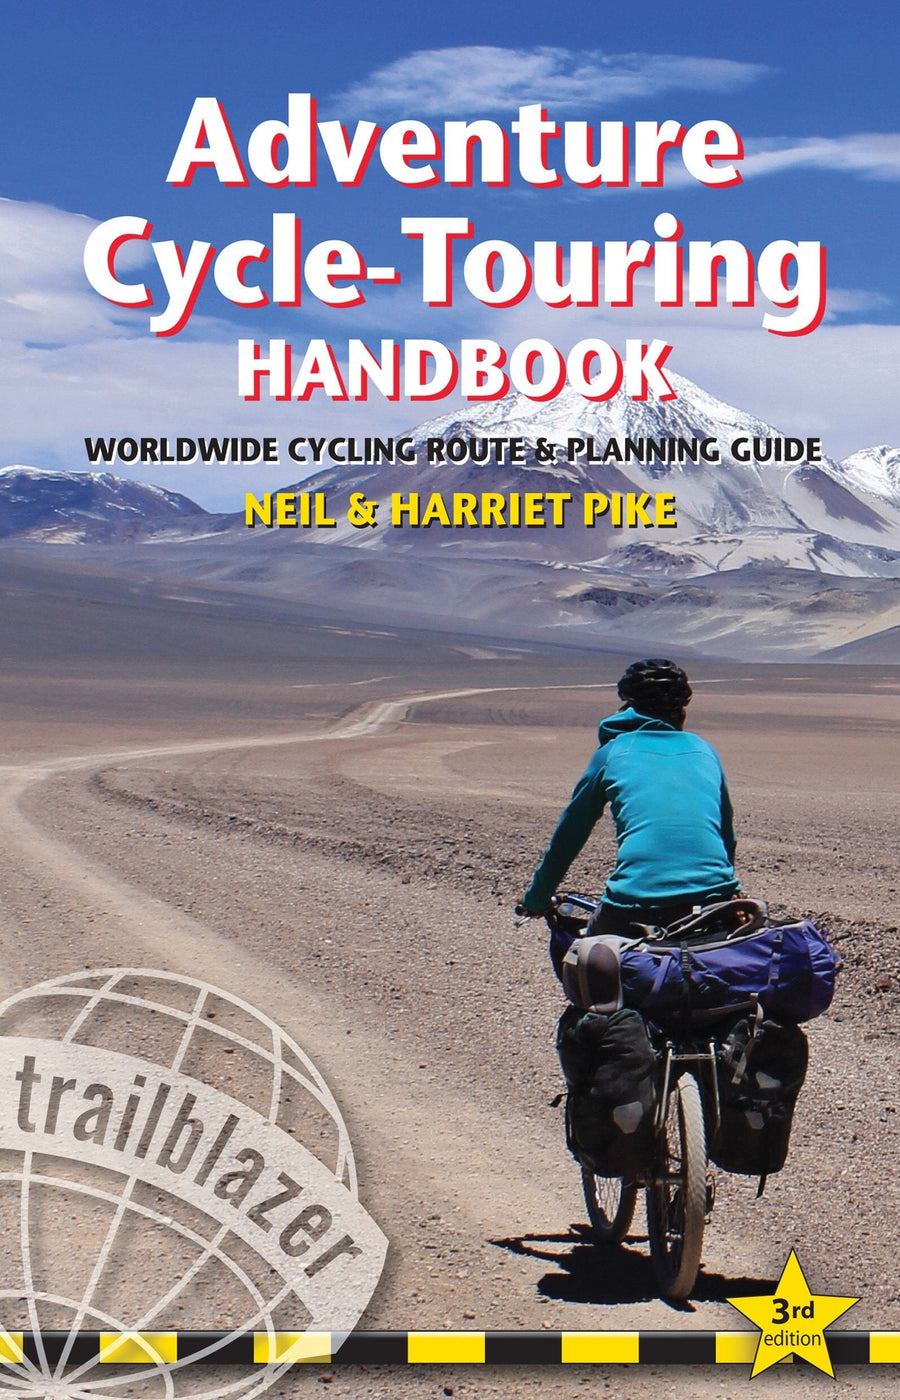 Guide pratique (en anglais) - Adventure Cycle Touring Handbook : Worldwide route and planning guide | Trailblazer guide pratique Trailblazer 